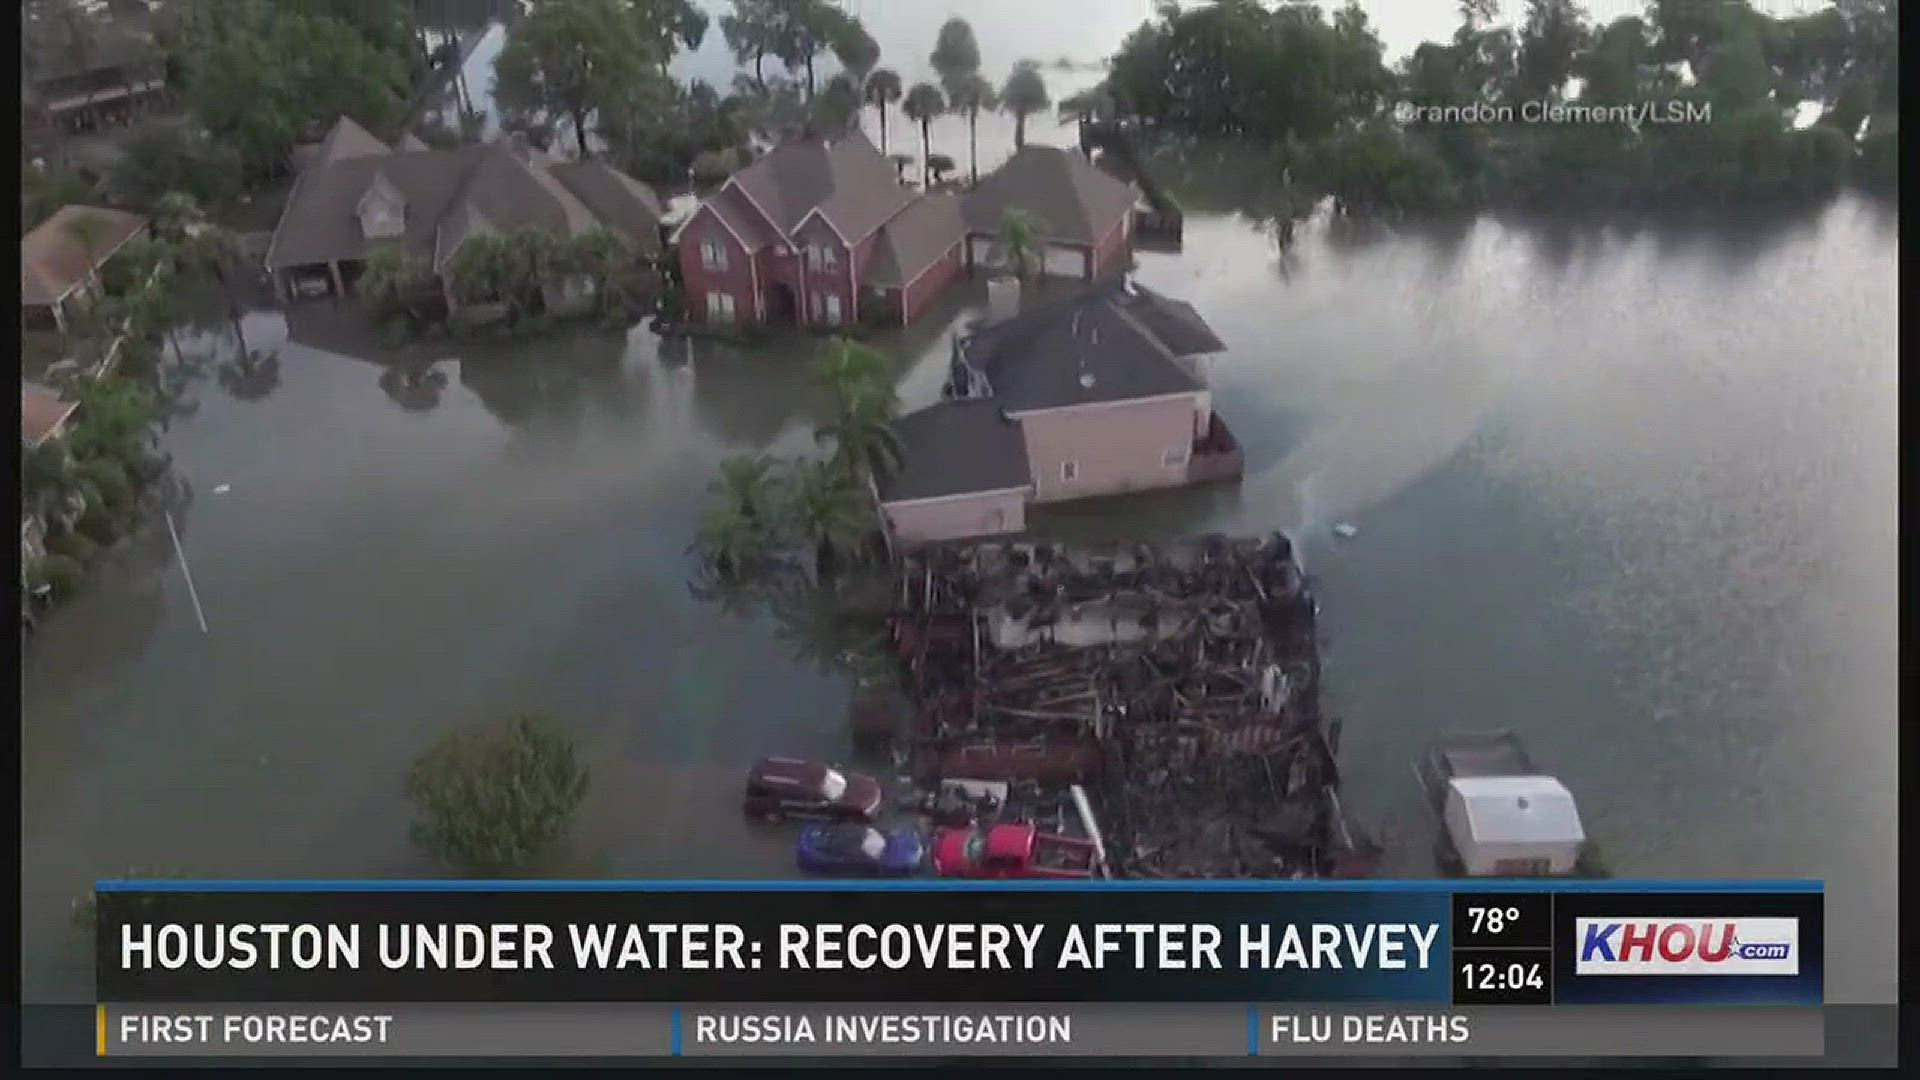 Mayor Sylvester Turner gave an update Friday morning on where the city is at in recovery from Hurricane Harvey - not just what's next to rebuild but be more resilient for the next storm.